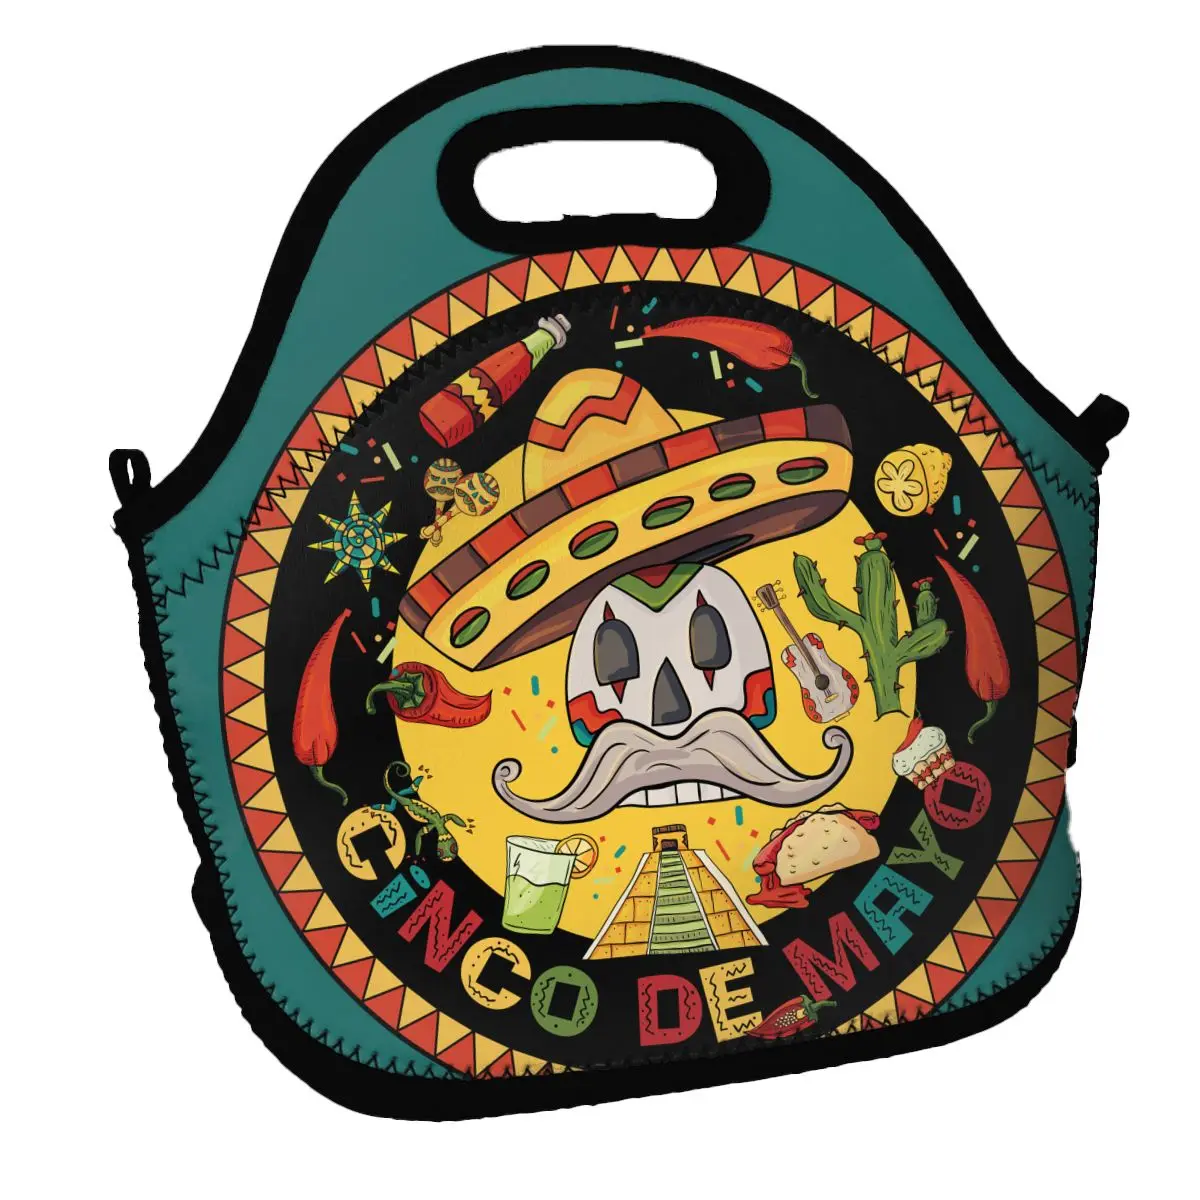 

2021 New Lunch Bag Mexican Skull In Sombrero Insulation Cold Thermal Convenient Leisure Bag